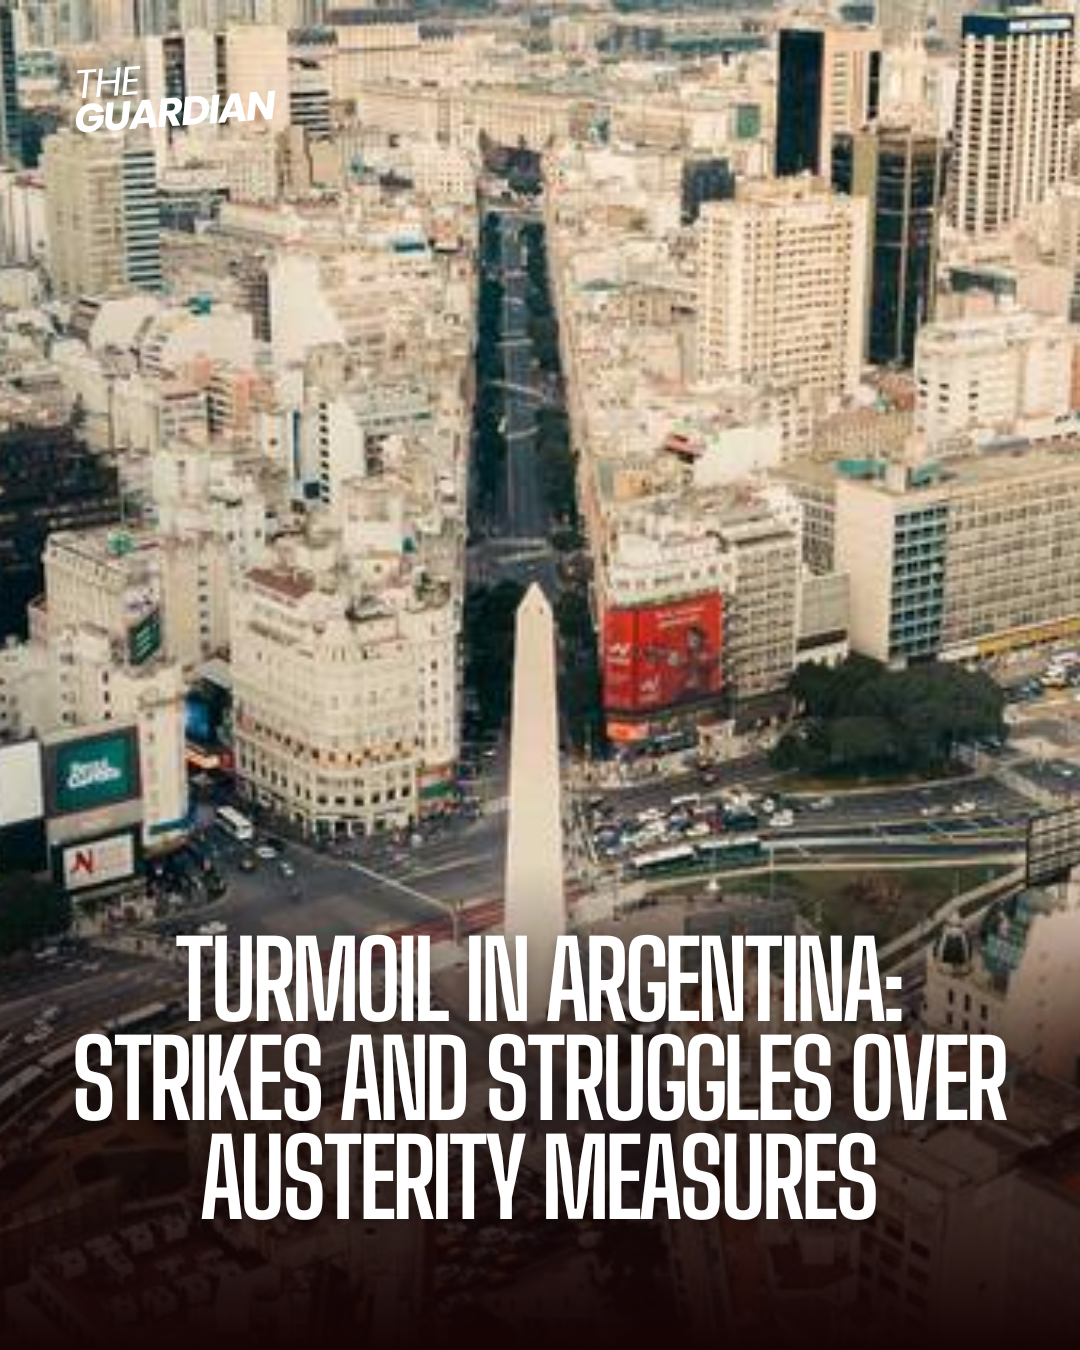 A general strike against public spending cuts has impacted most of Argentina, with academies, banks, and multiple stores remaining shut.